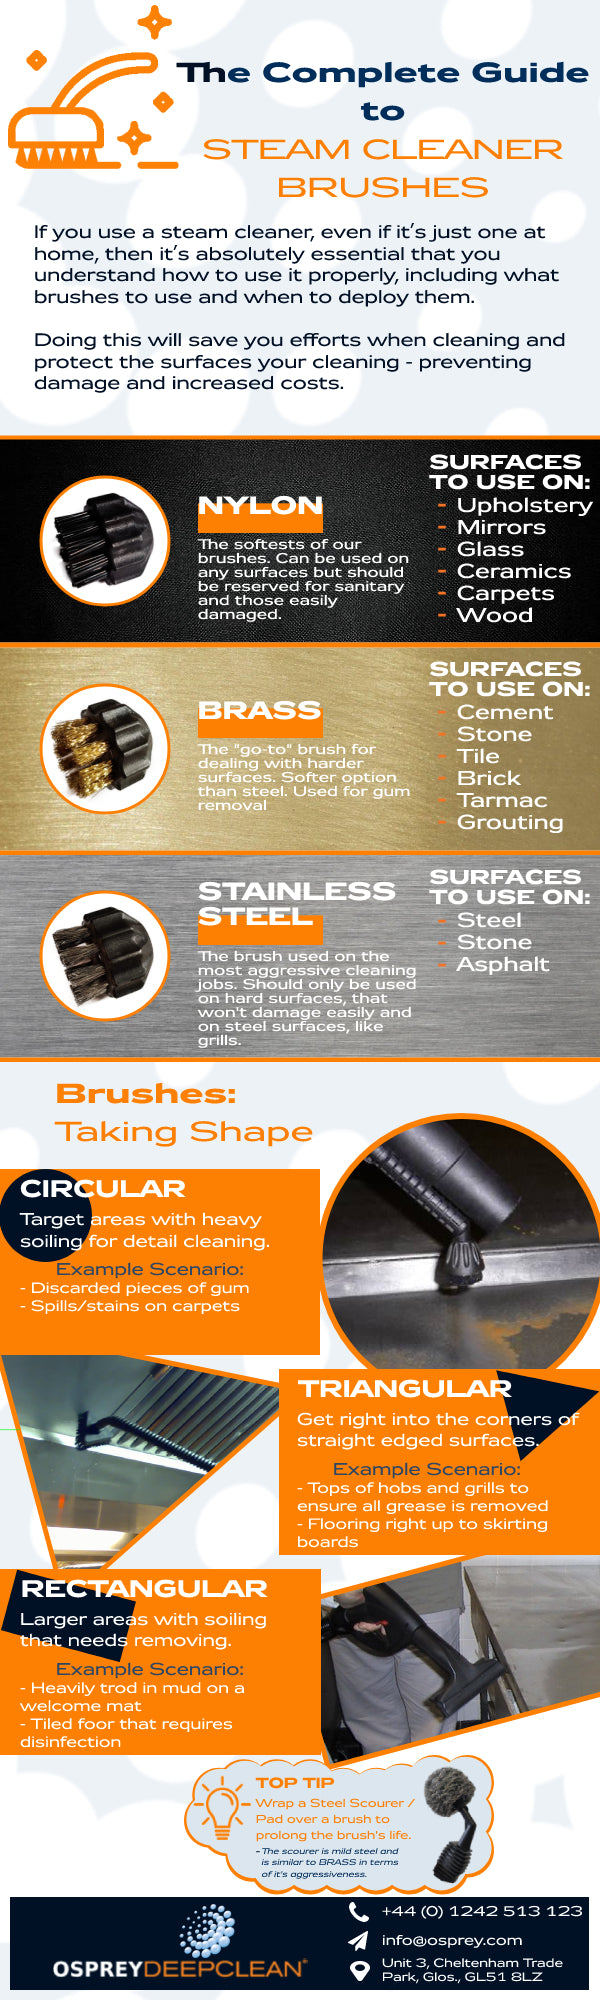 Steam Cleaner Brushes Infographic - detailing all you need to know about which material, be it - nylon, brass or steel - and shape brush to use